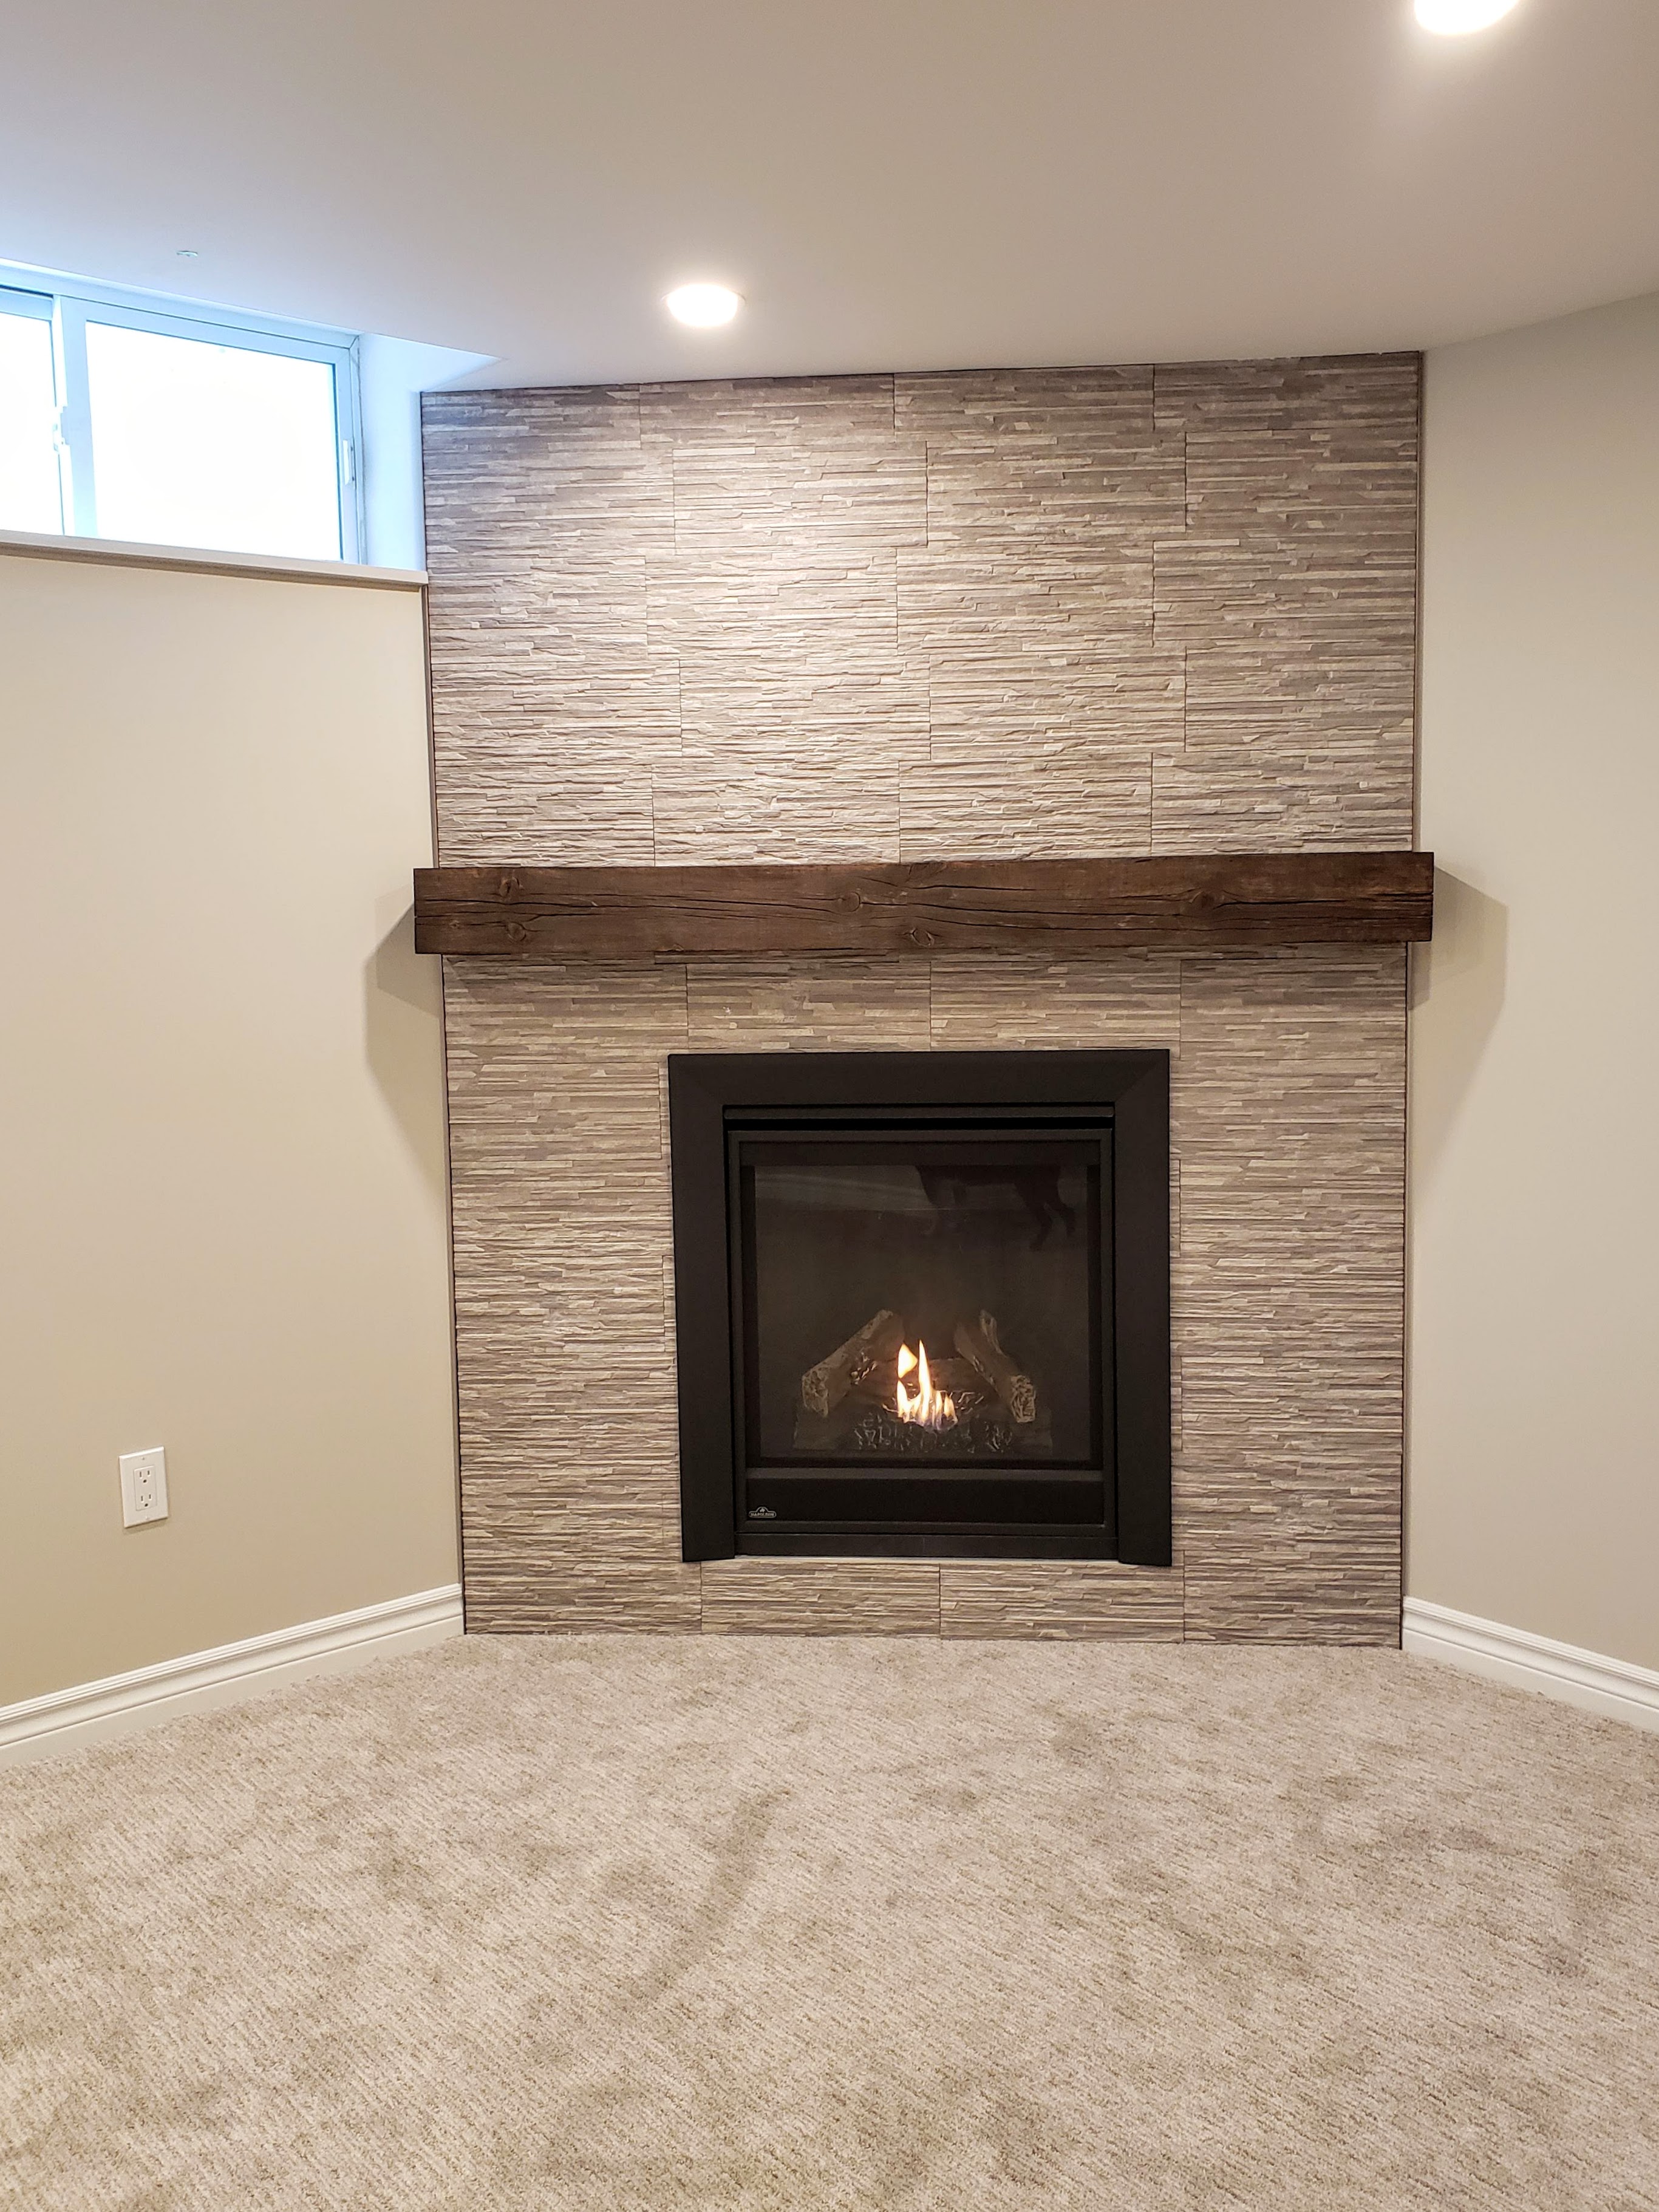 Gas fireplace with tile surround and rustic mantel by Germano Creative Interior Contracting Ltd.